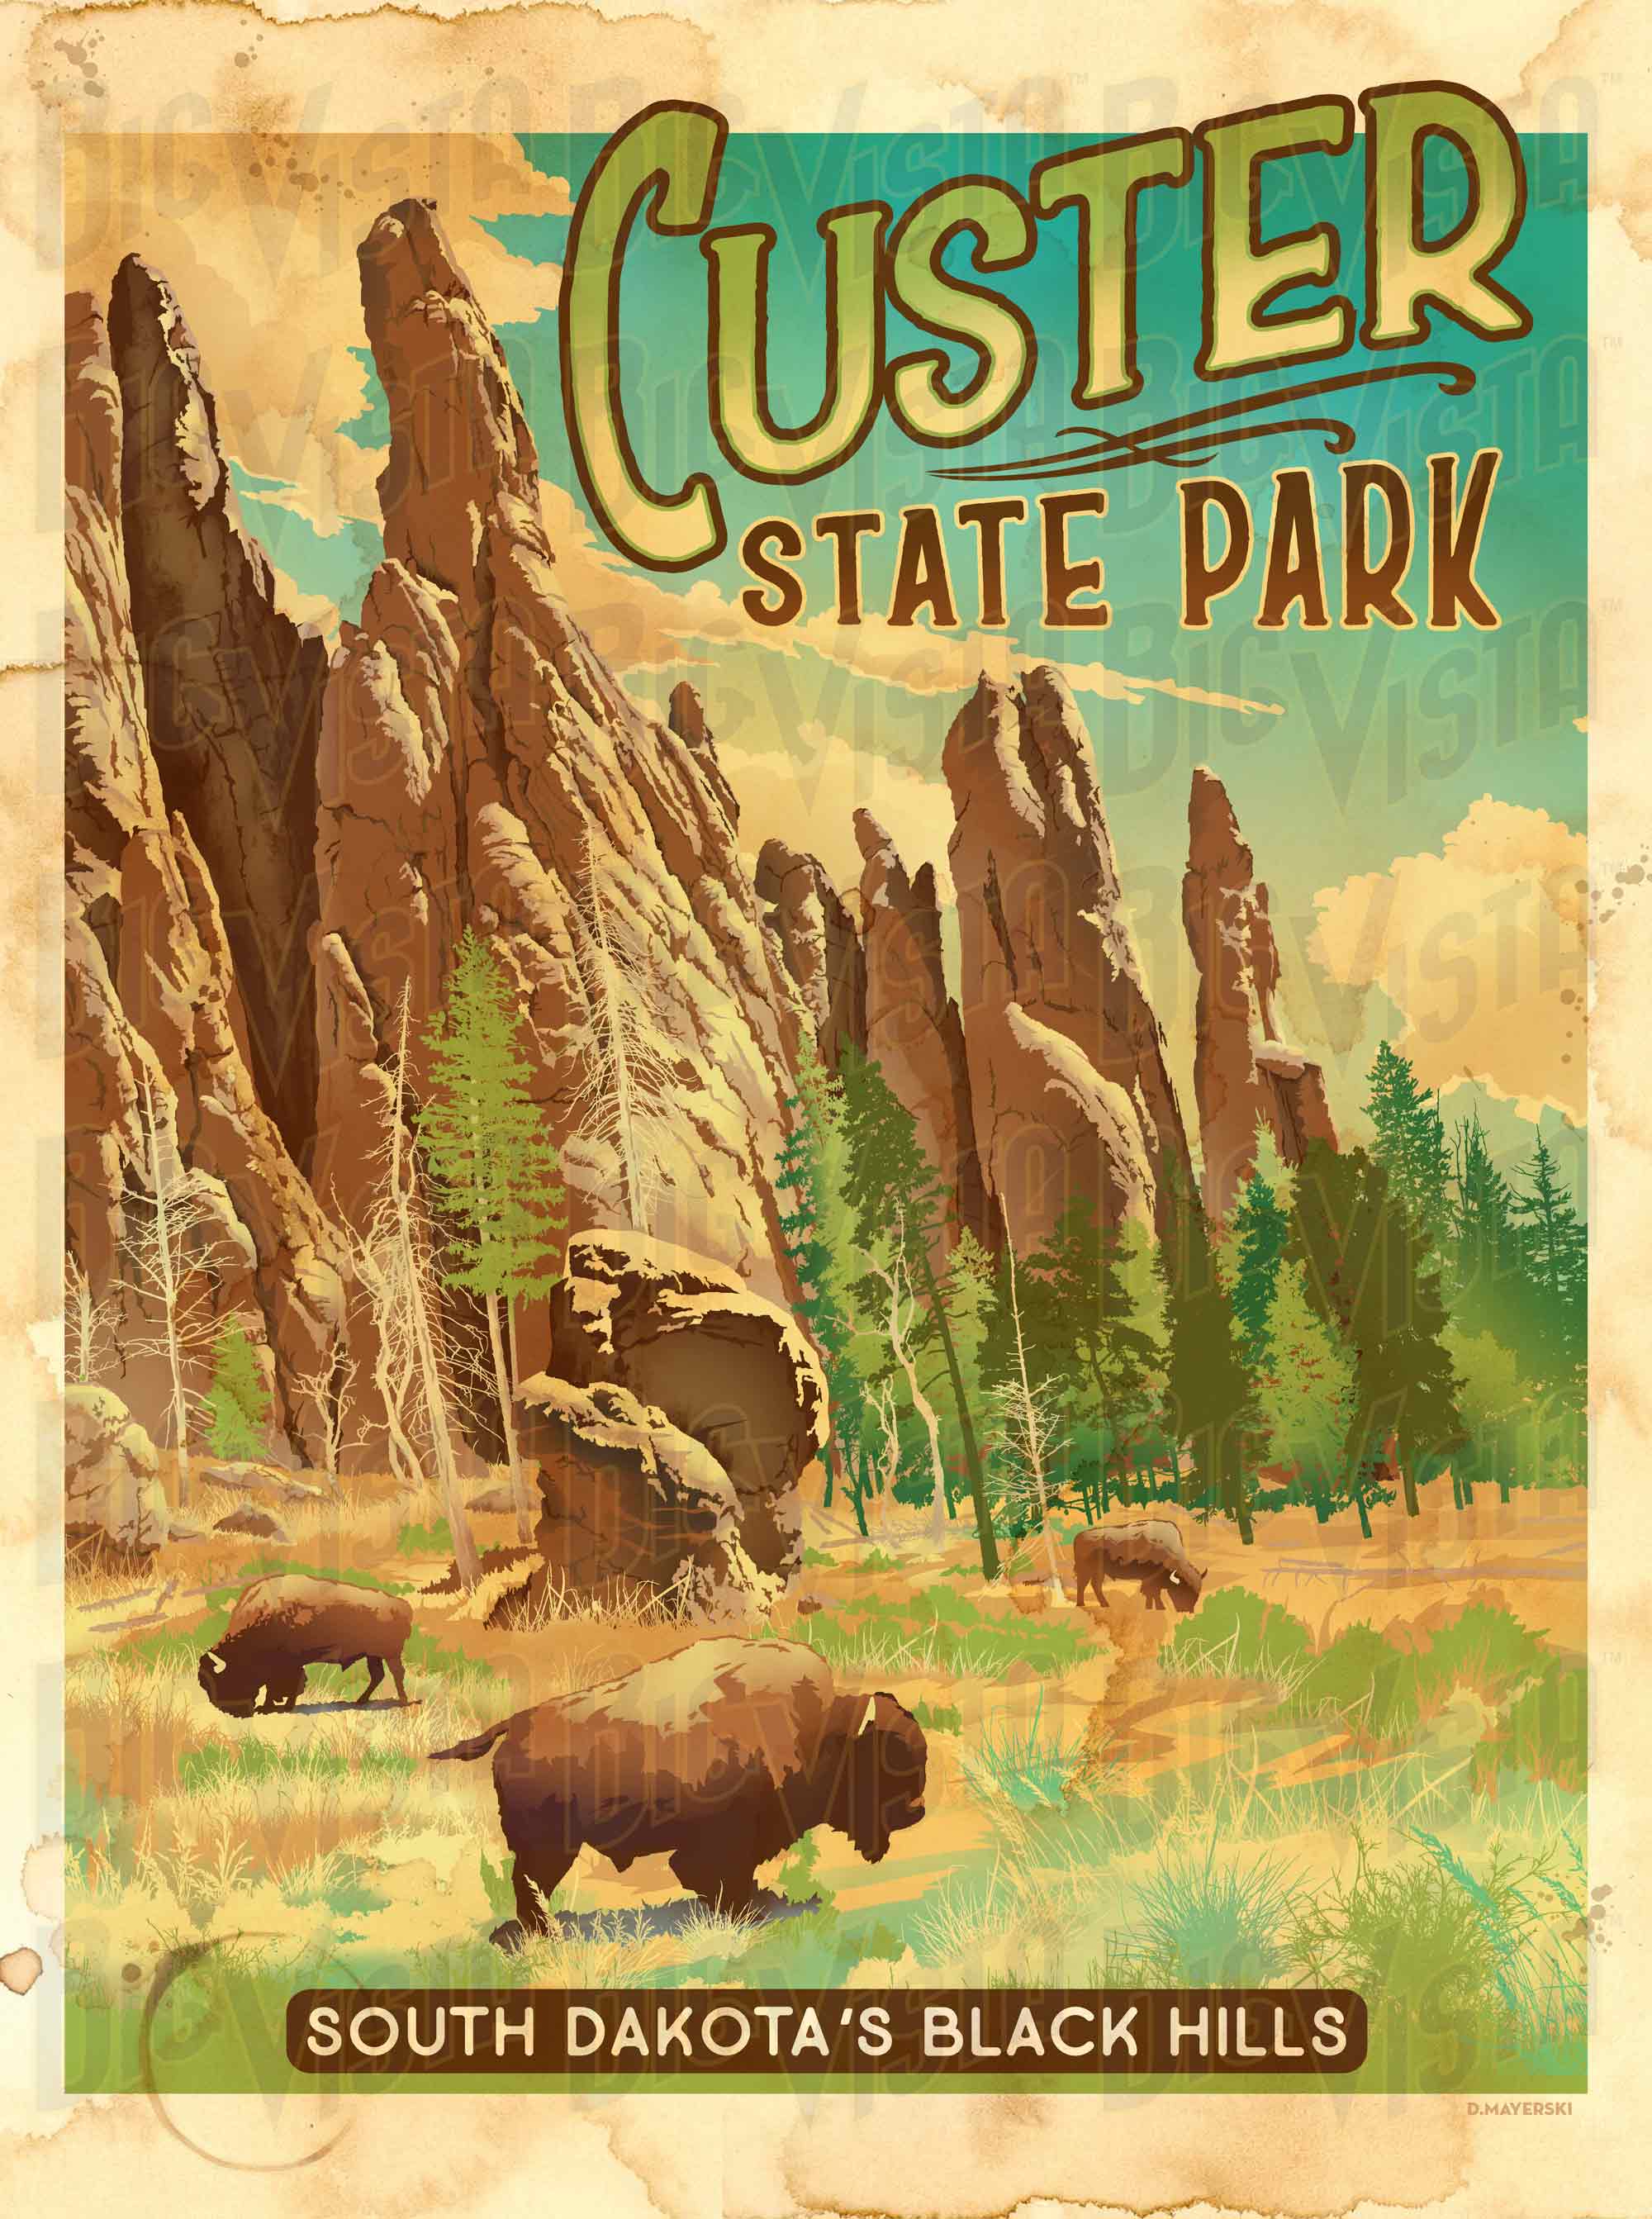 Custer State Park poster